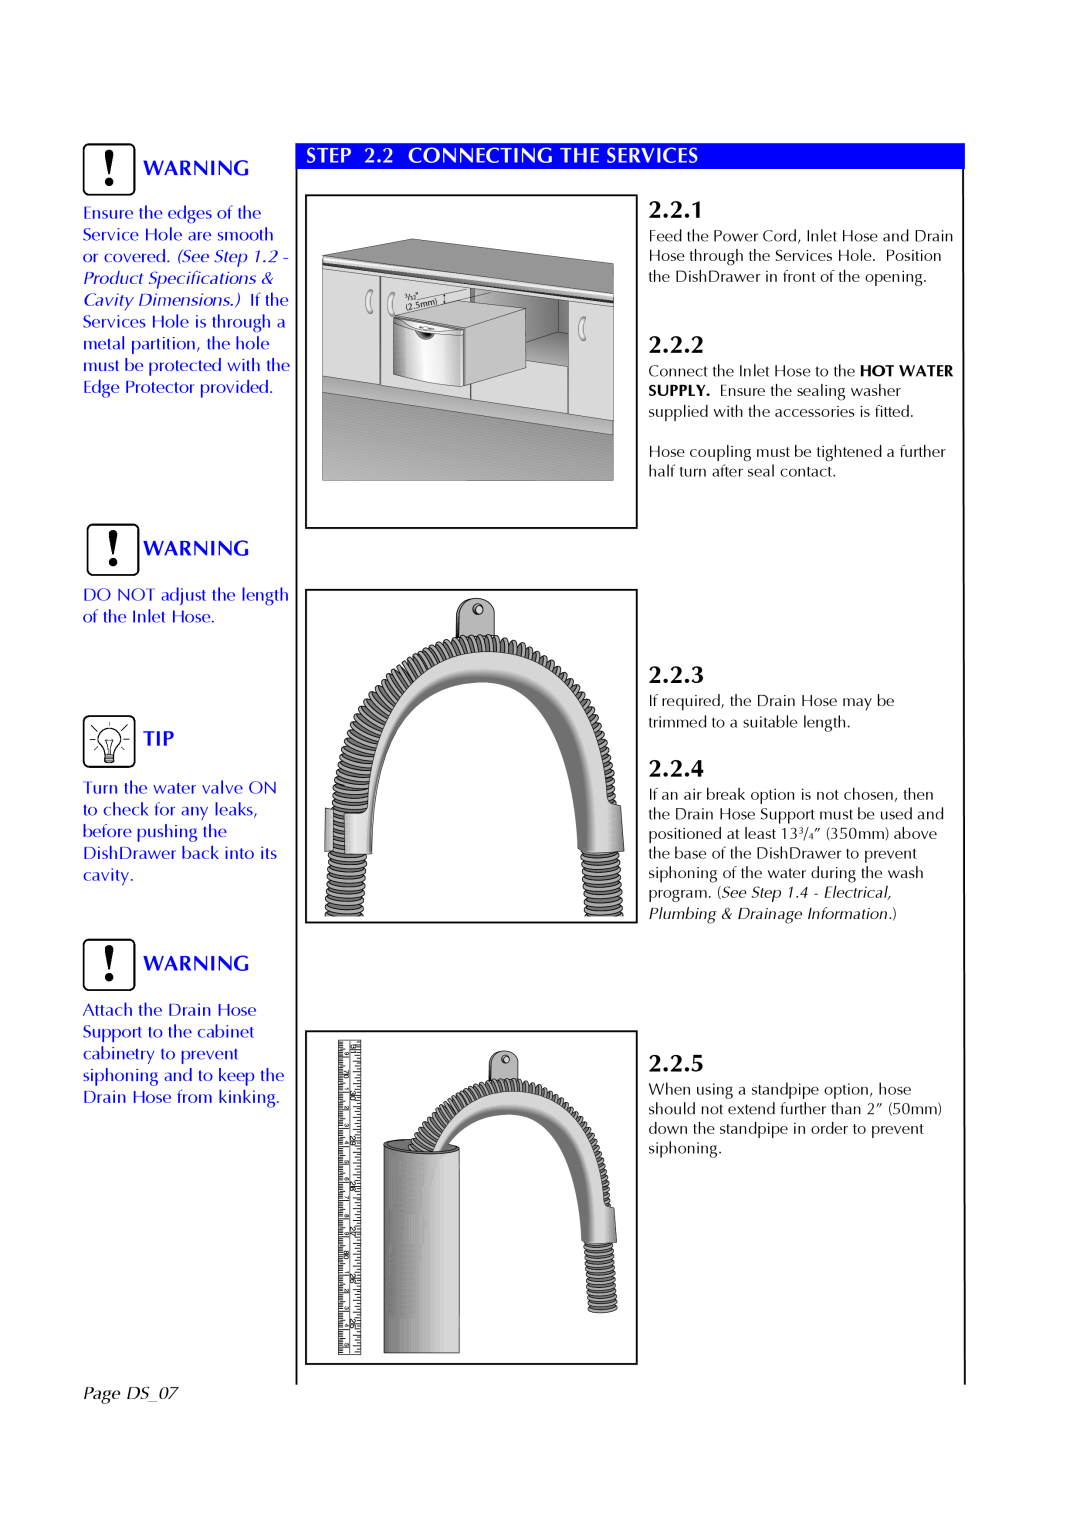 Fisher & Paykel DS602I manual 2.2.1, 2.2.2, 2.2.3, 2.2.4, 2.2.5, 2 CONNECTING THE SERVICES, Page DS07 